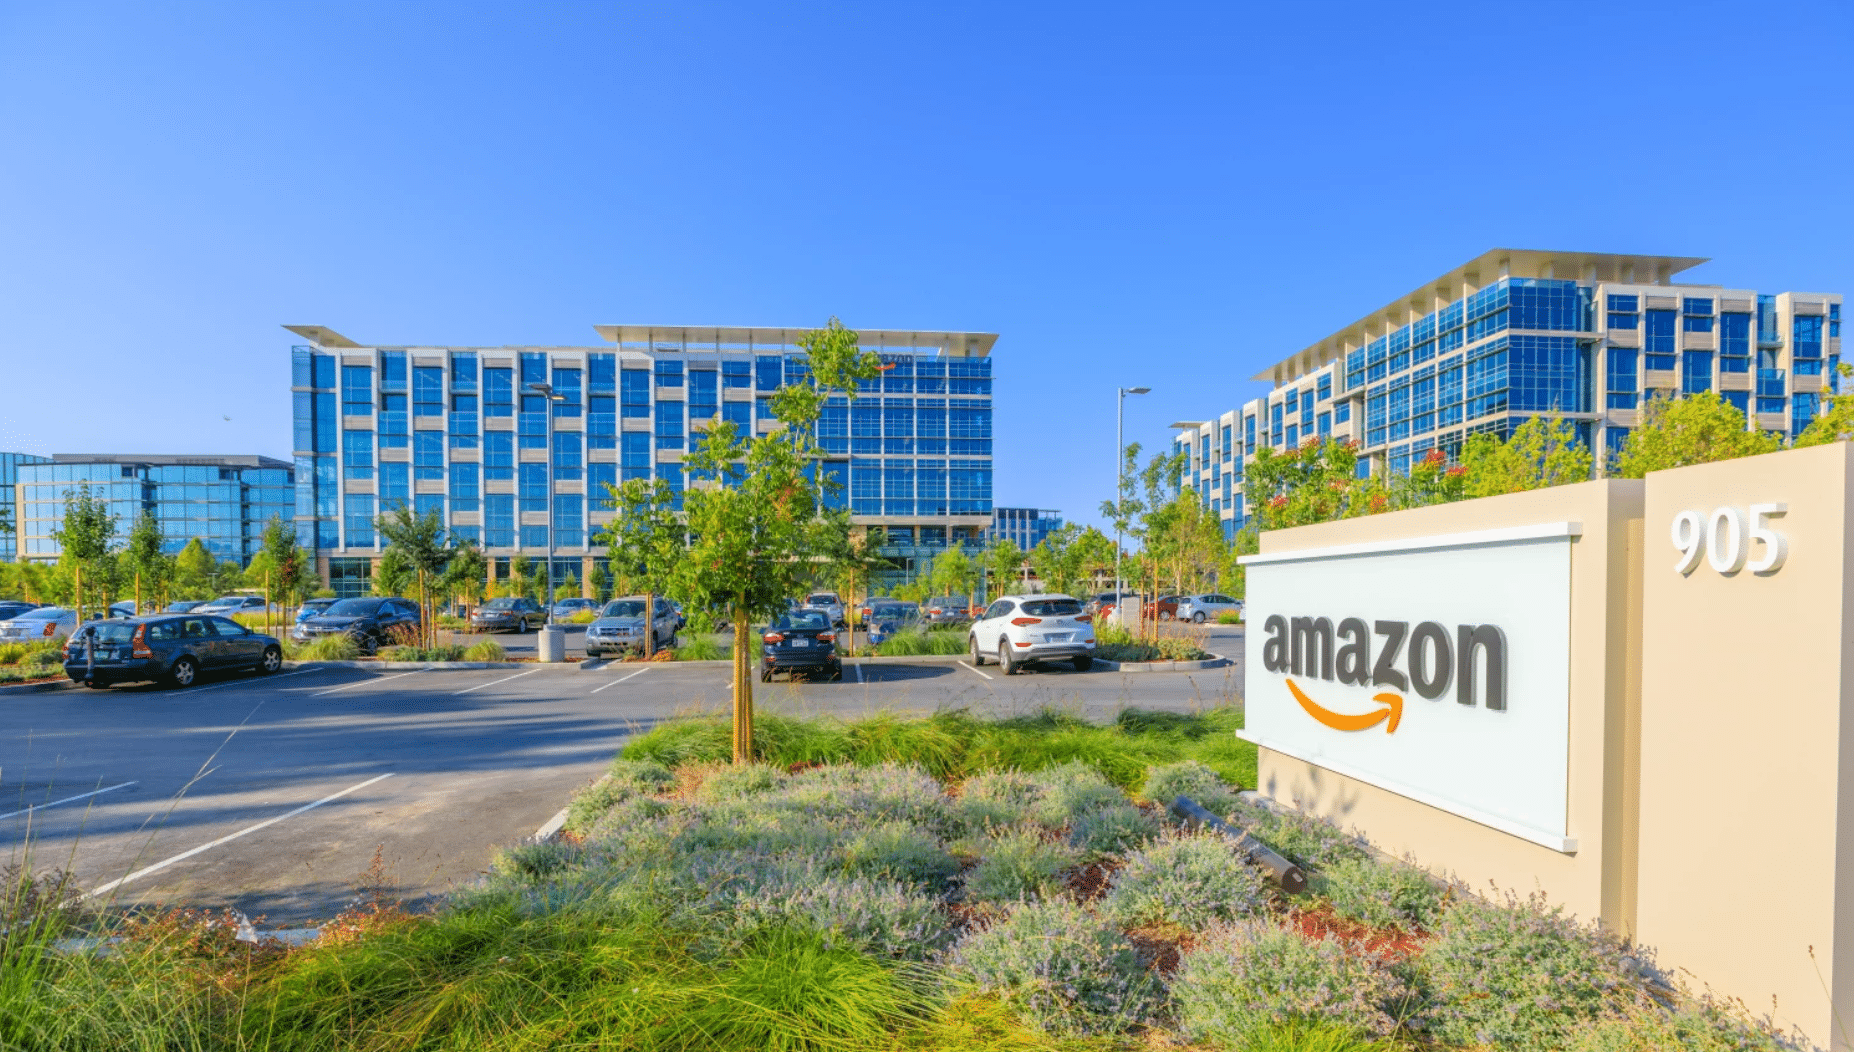 first new york now virginia amazon seeing pushback on its second hq2 location